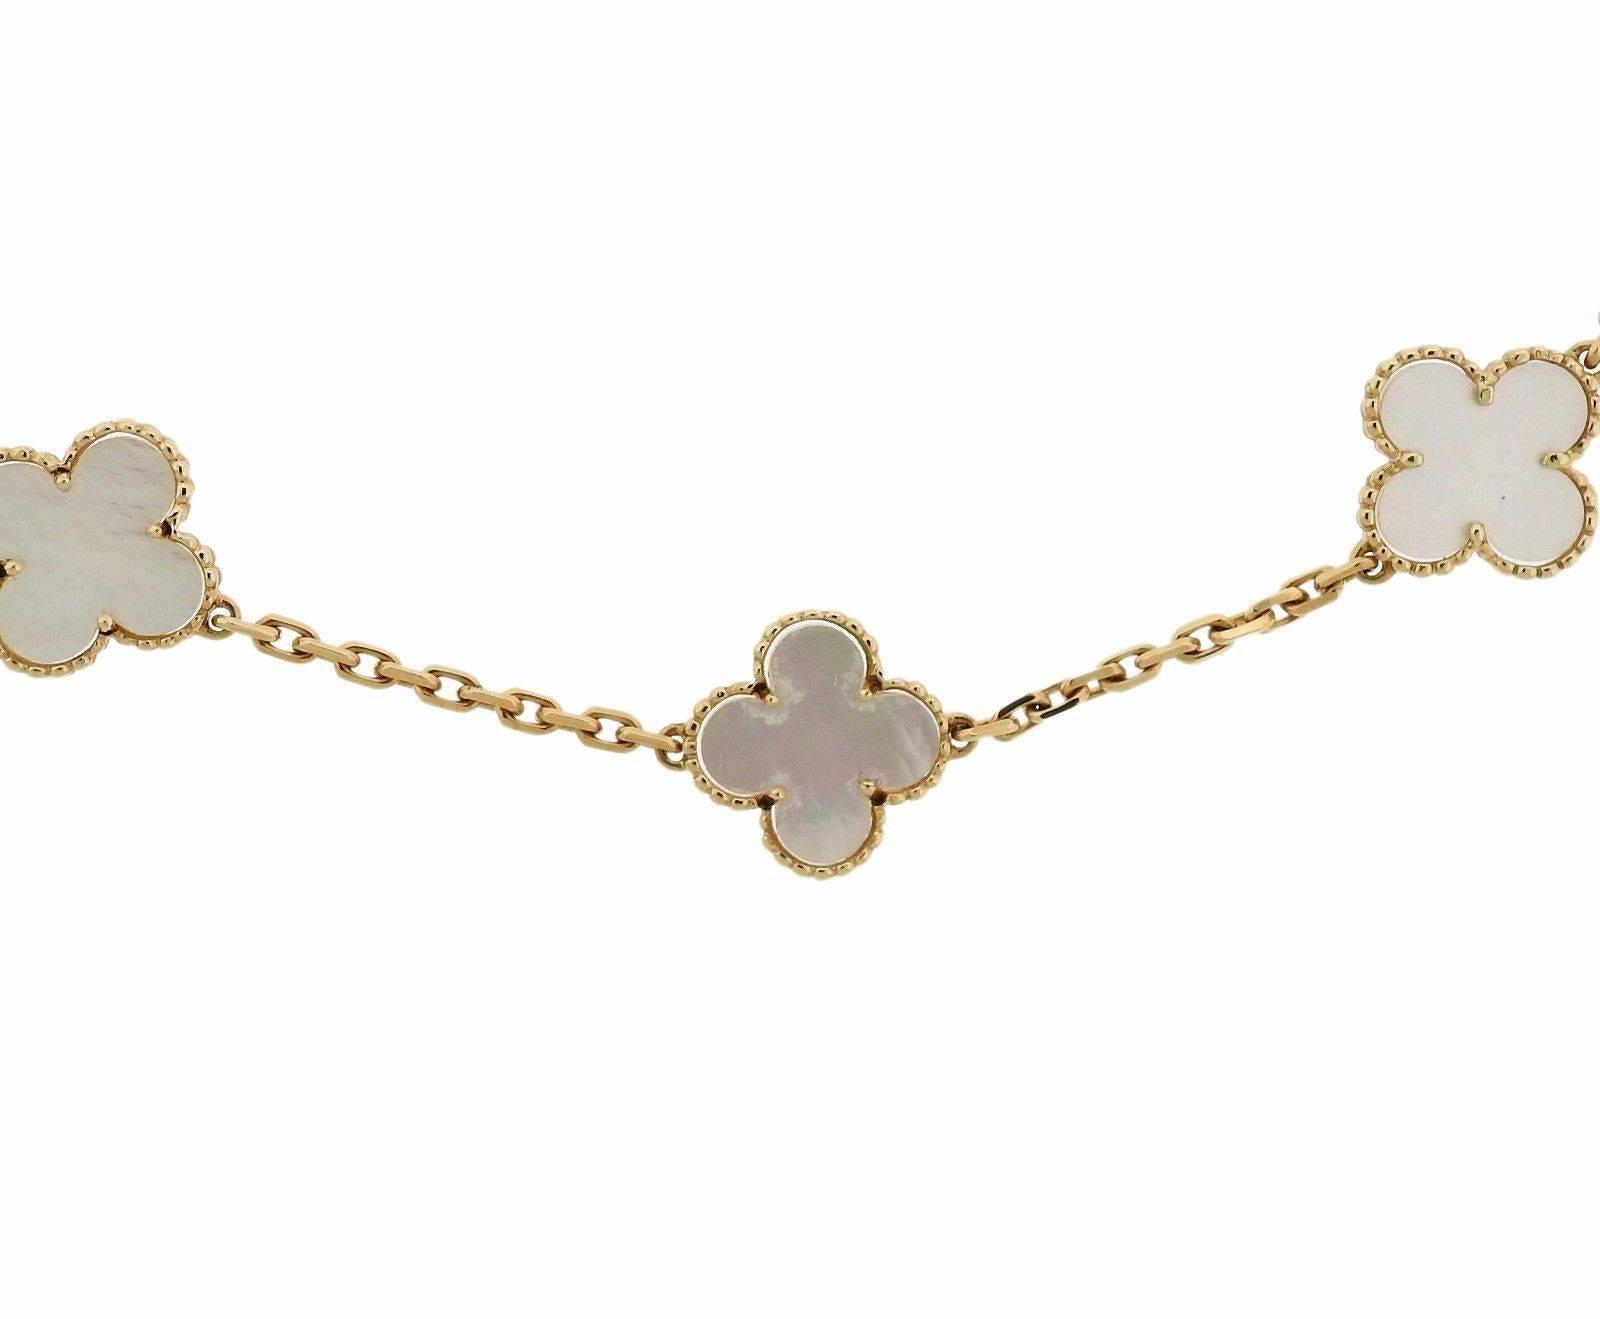 An 18k yellow gold necklace set with mother of pearl.  The necklace is 16 1/2" long and the clovers measure 14.5mm x 14.5mm.  Marked:	VCA 750, CL24819.  The weight of the piece is 21.4 grams.
Comes with pouch and copy of receipt.